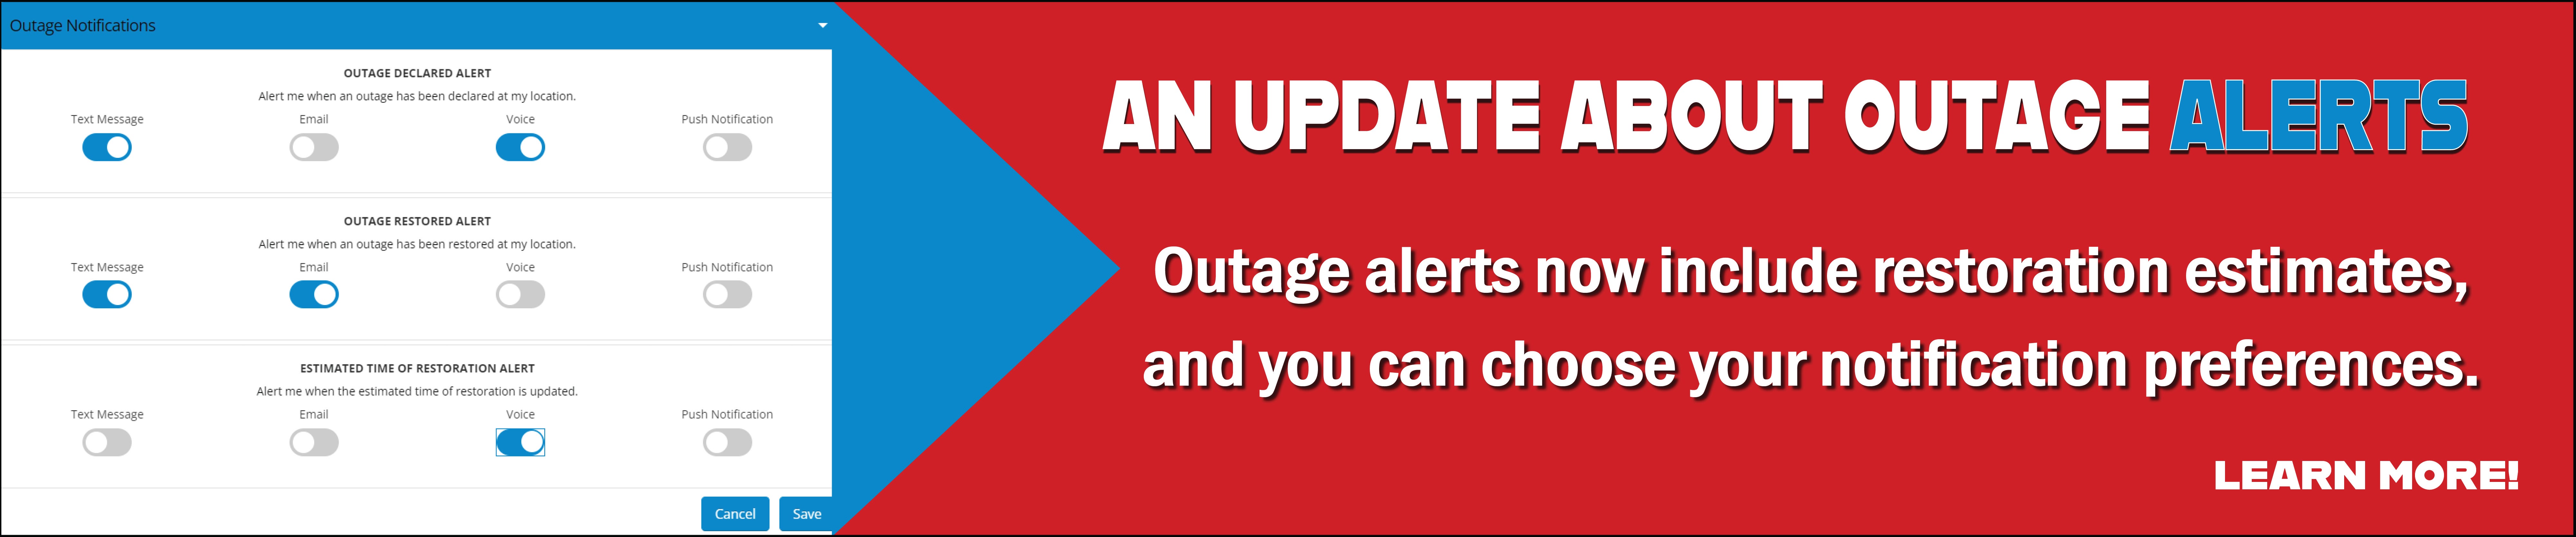 An update about outage alerts